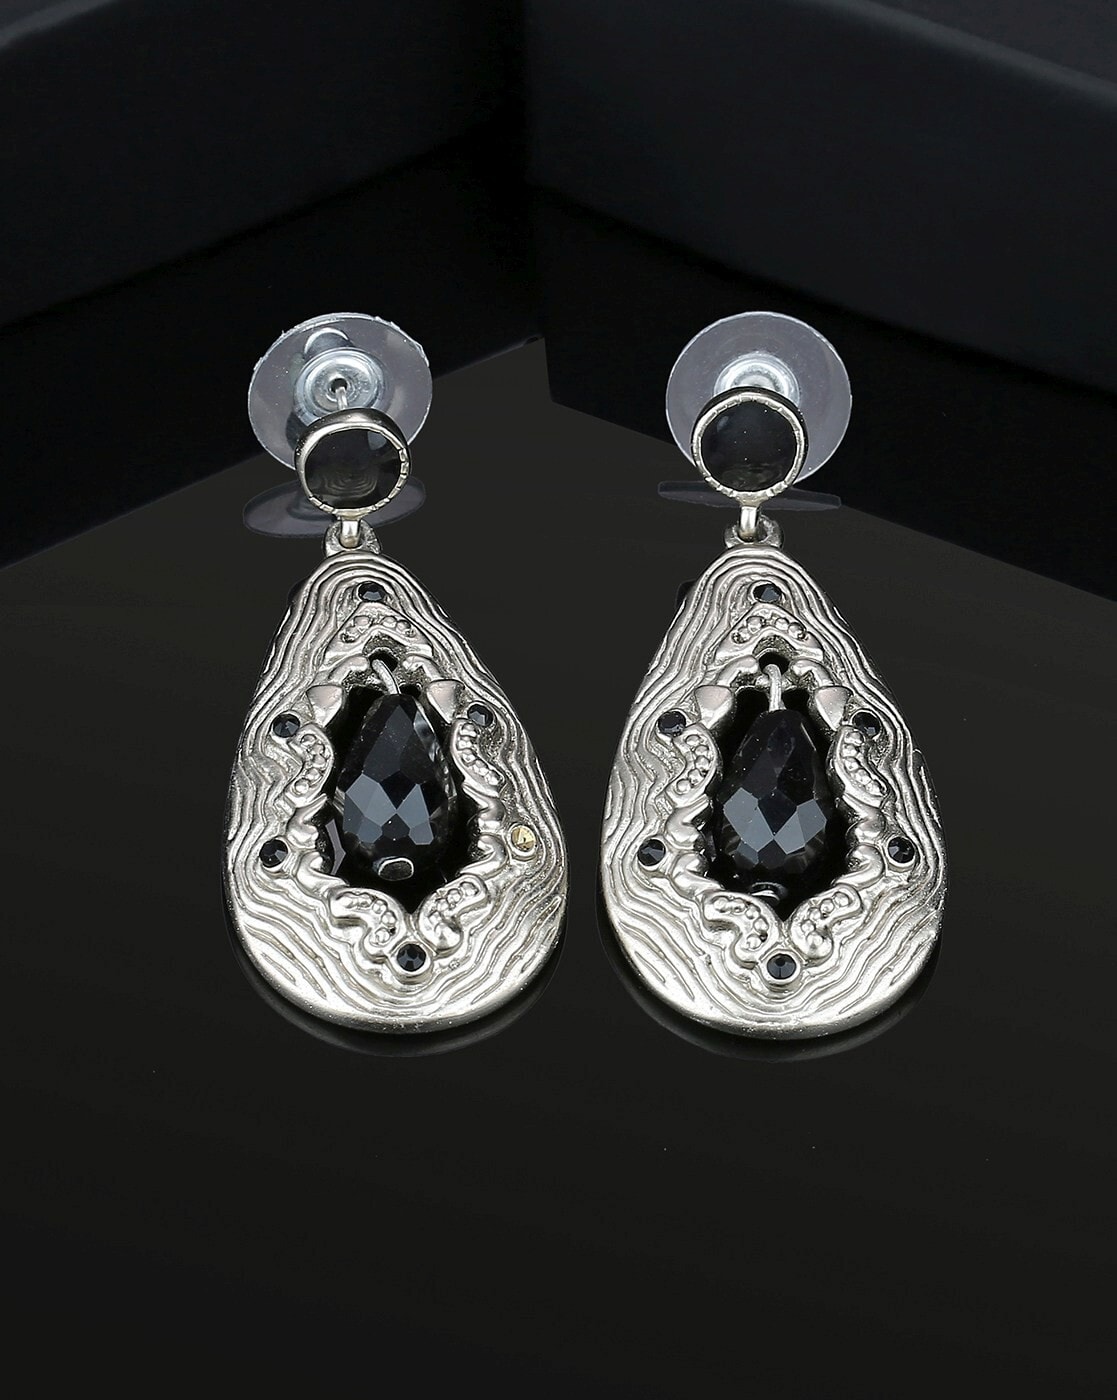 925 Sterling Silver Tribal DropDangle Earrings With Black Onyx Stones